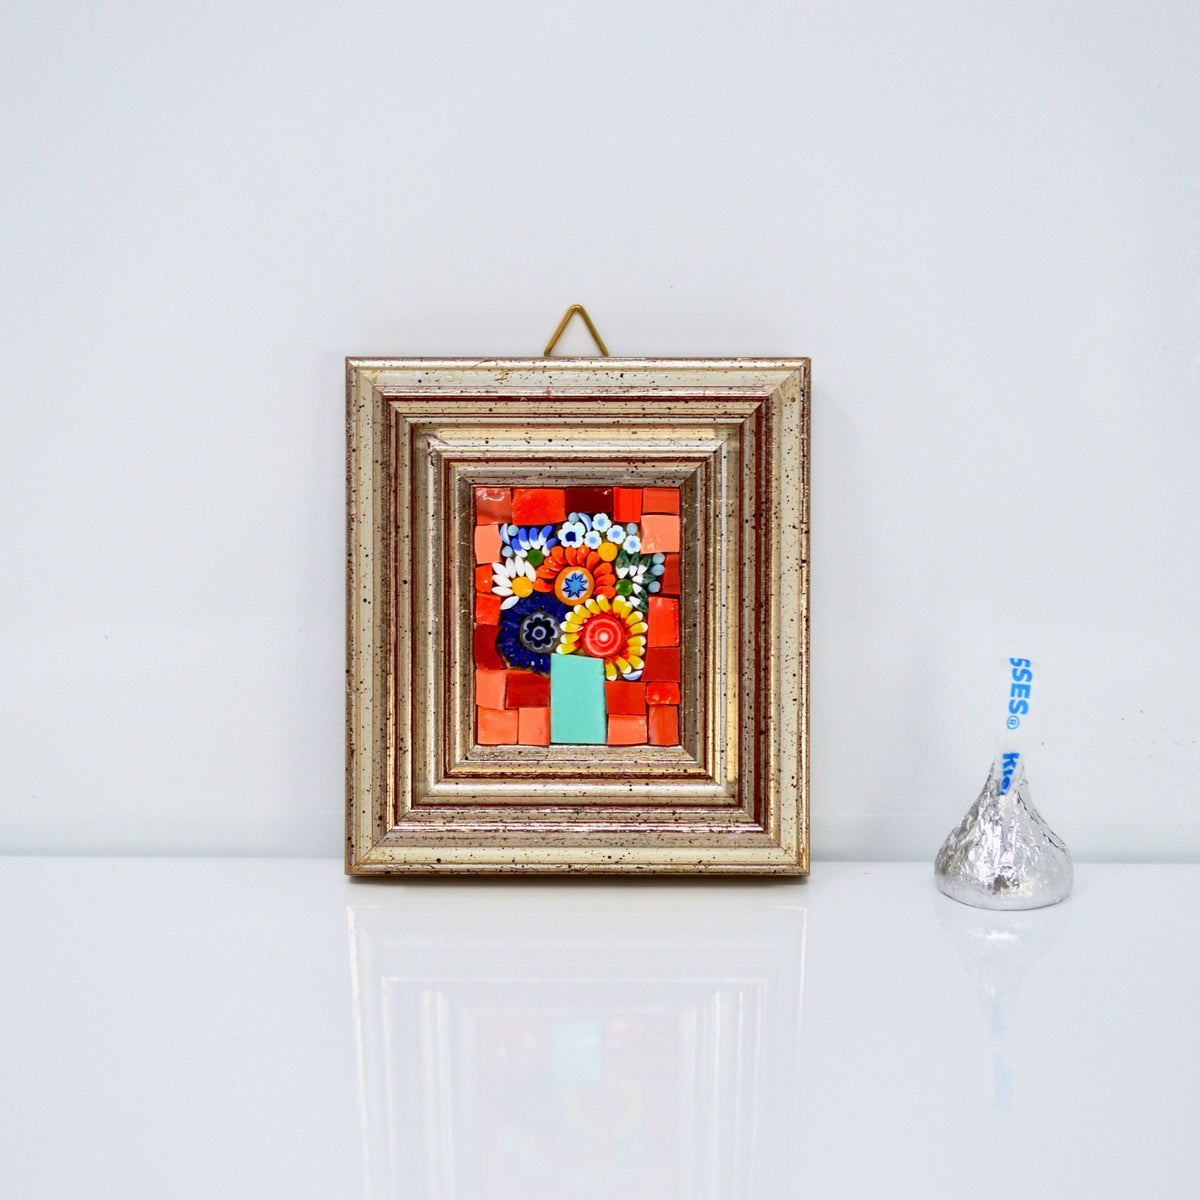 Miniature Framed Glass Floral Mosaic Art, Murano Glass, Red, Orange, Made in Italy - My Italian Decor